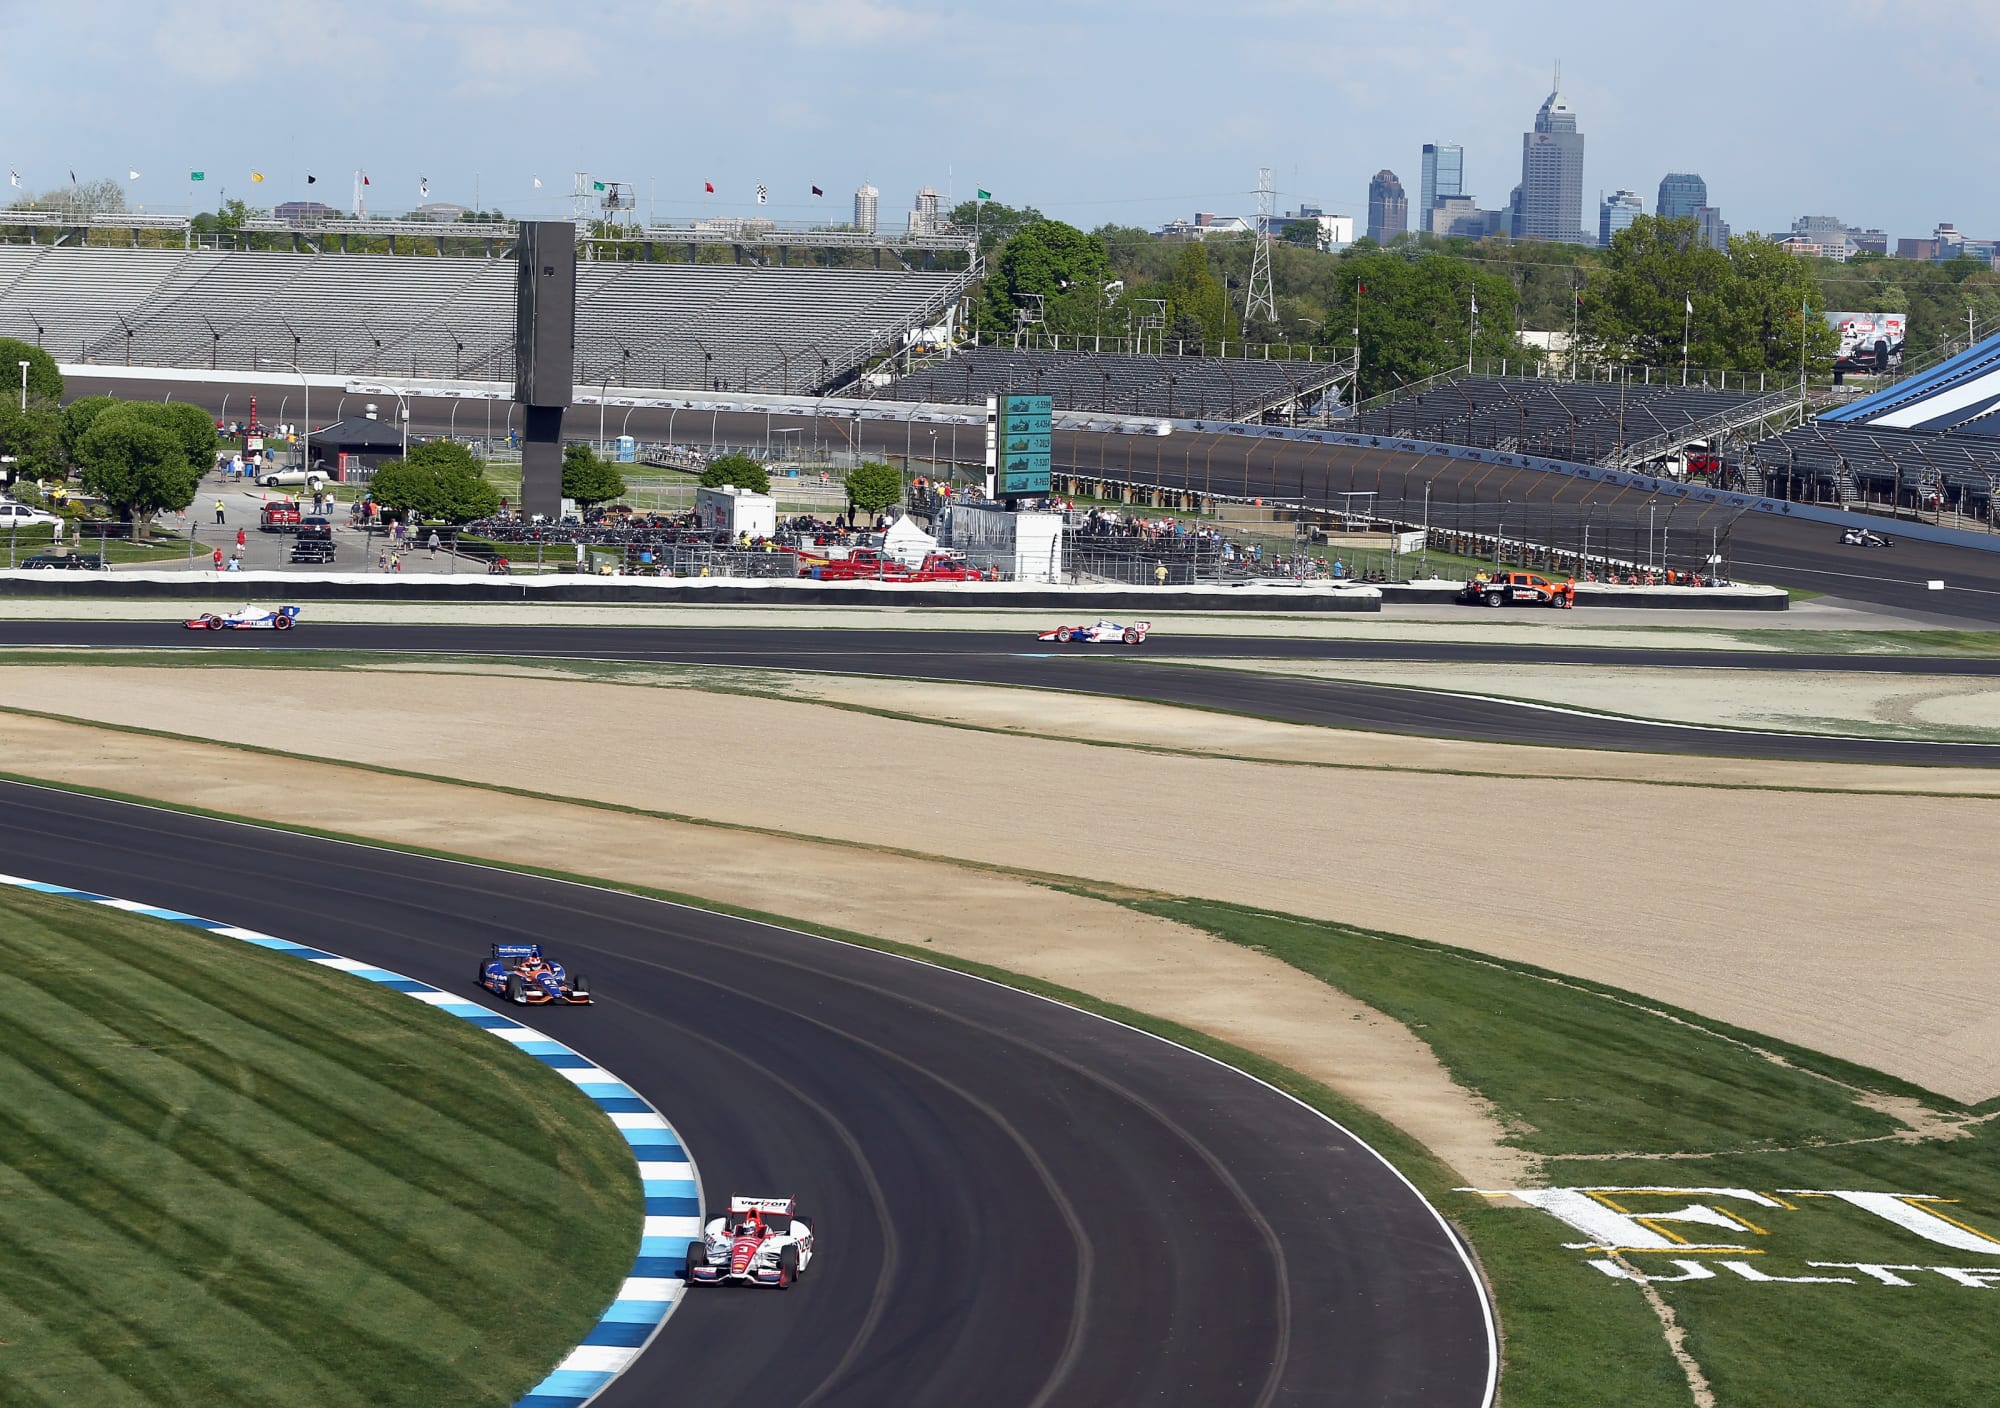 IndyCar The Grand Prix of Indianapolis is a gimmick, but that's not a